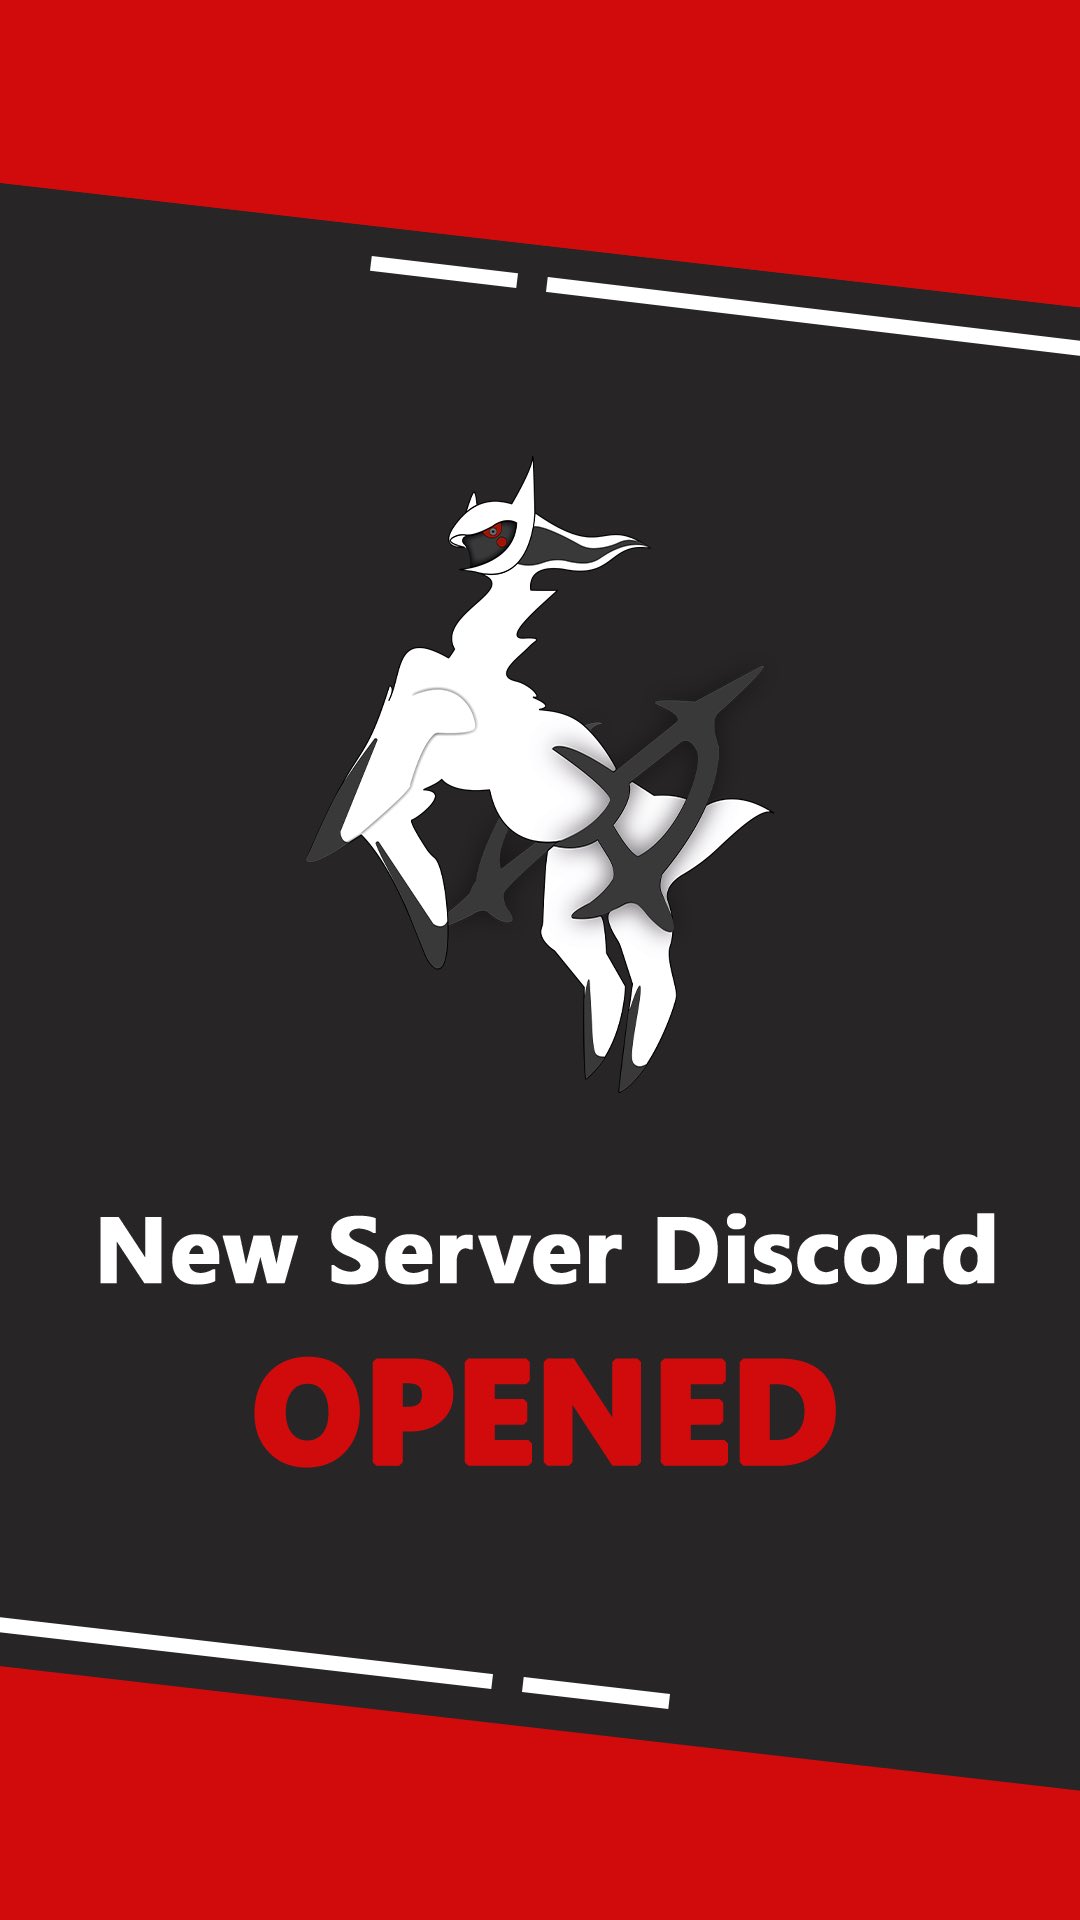 Arceus X on X: New Discord server officially opened!